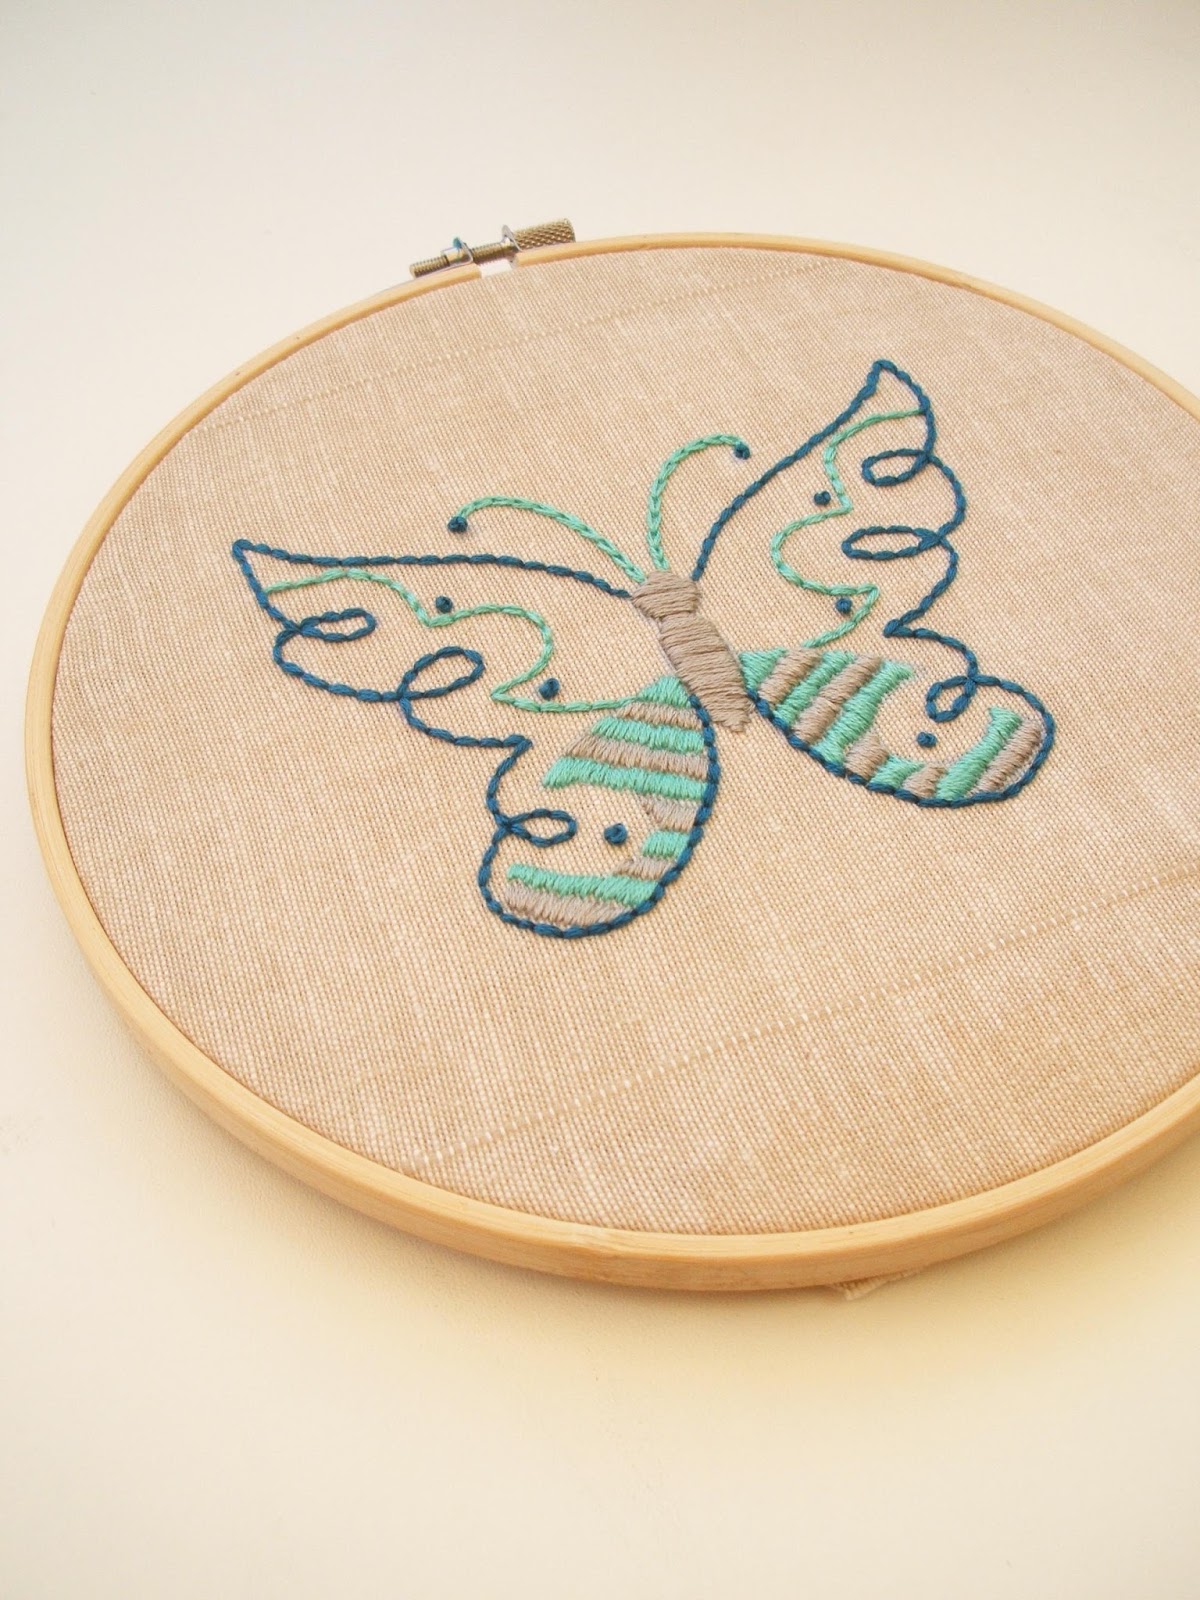 Embroidery frame - Creature